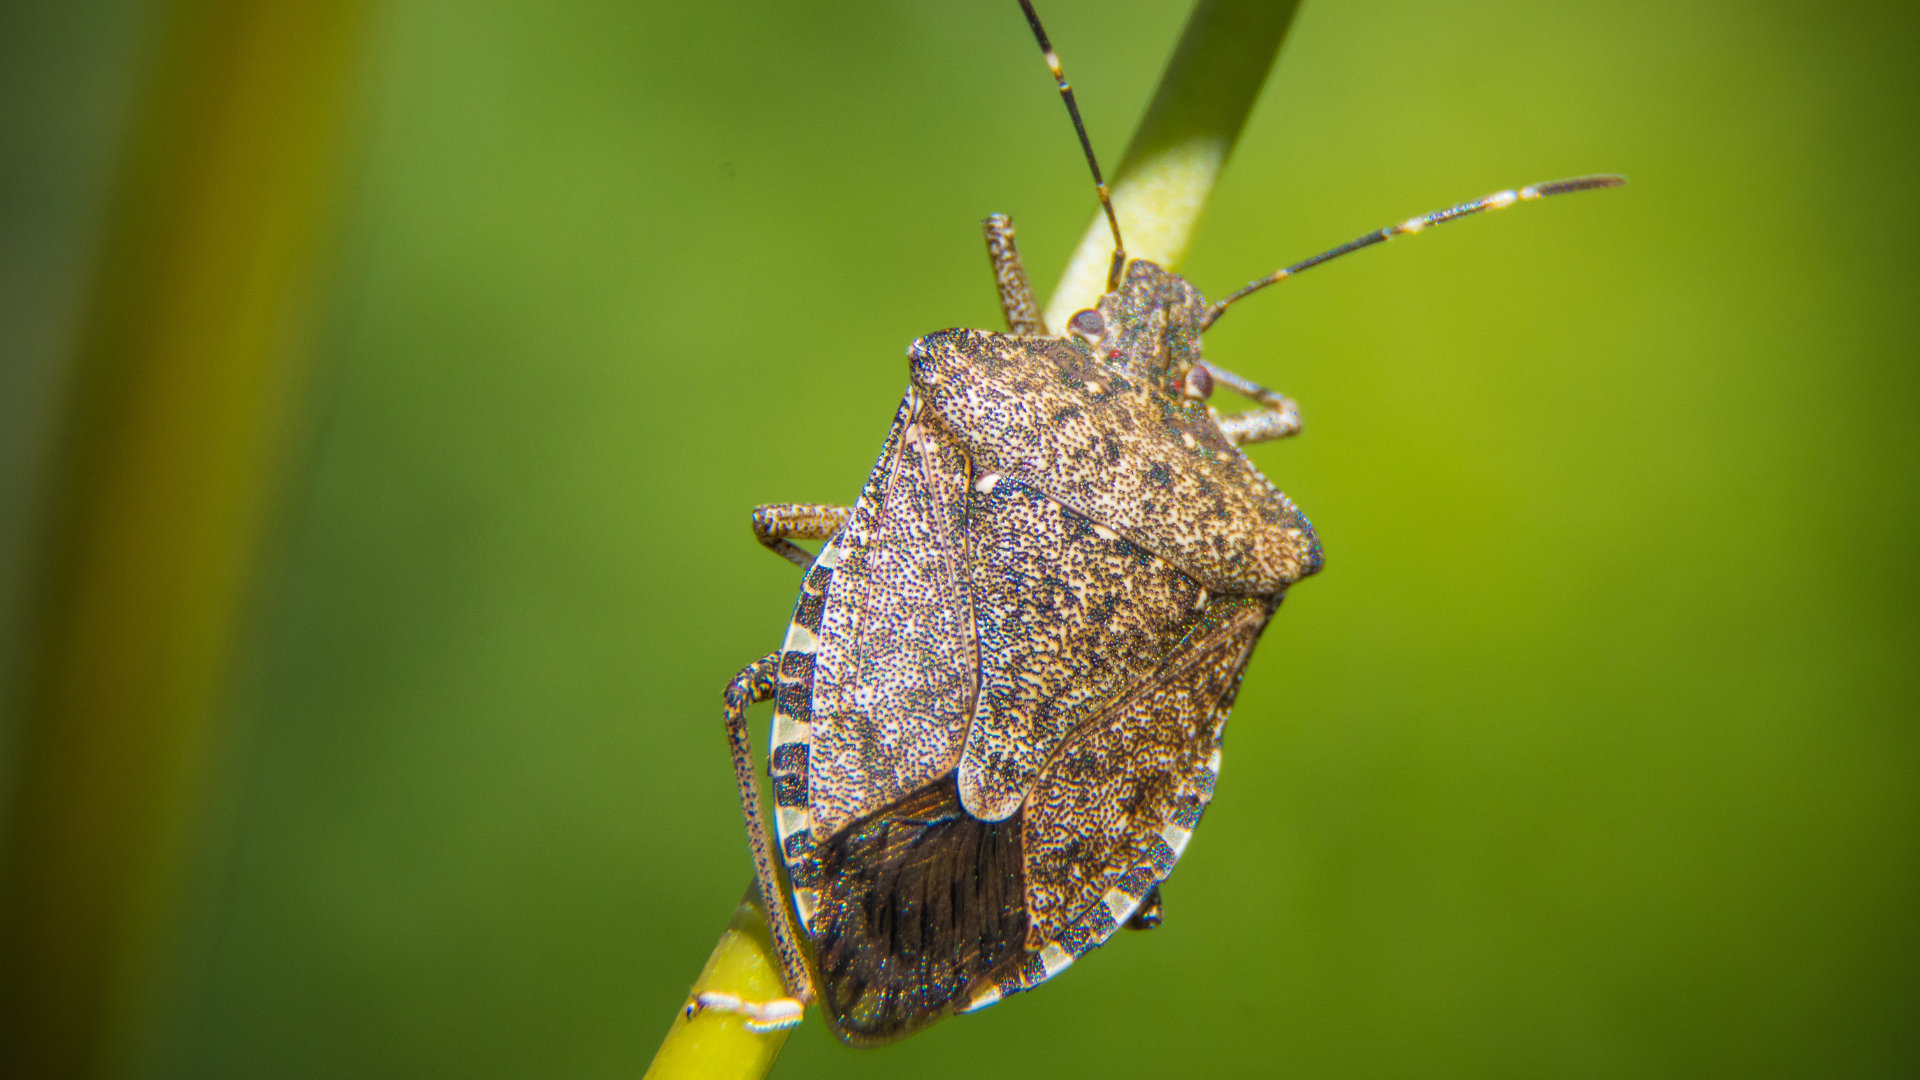 Brown marmorated stink bugs are not aggressive